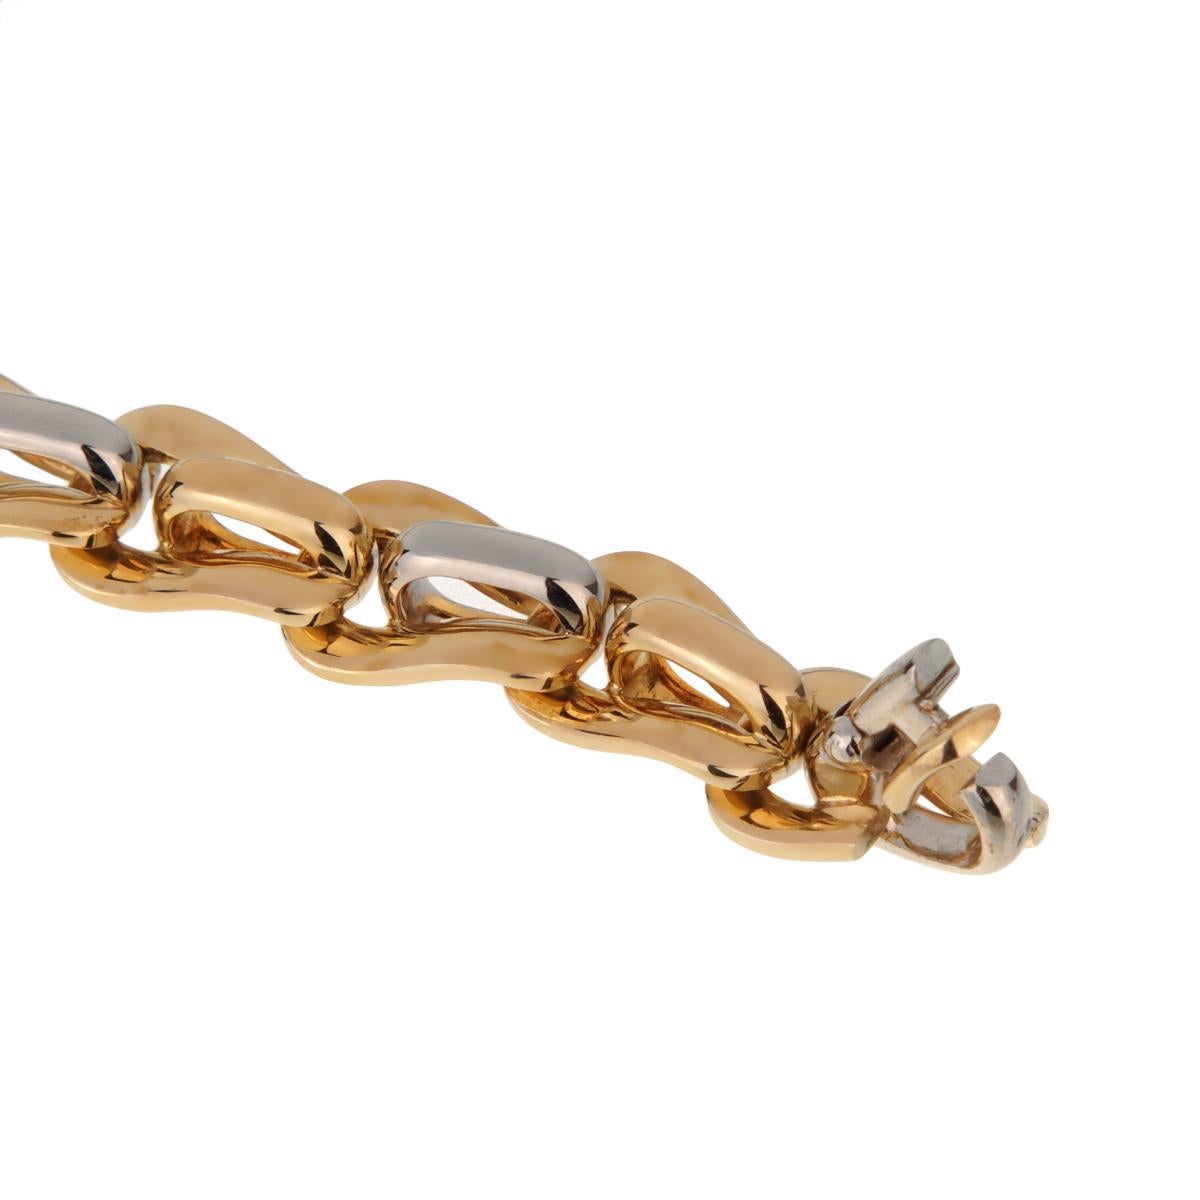 A magnificent vintage Pomellato link bracelet featuring alternating white and yellow gold links in 18k gold. This impressive bracelet measures 7.5